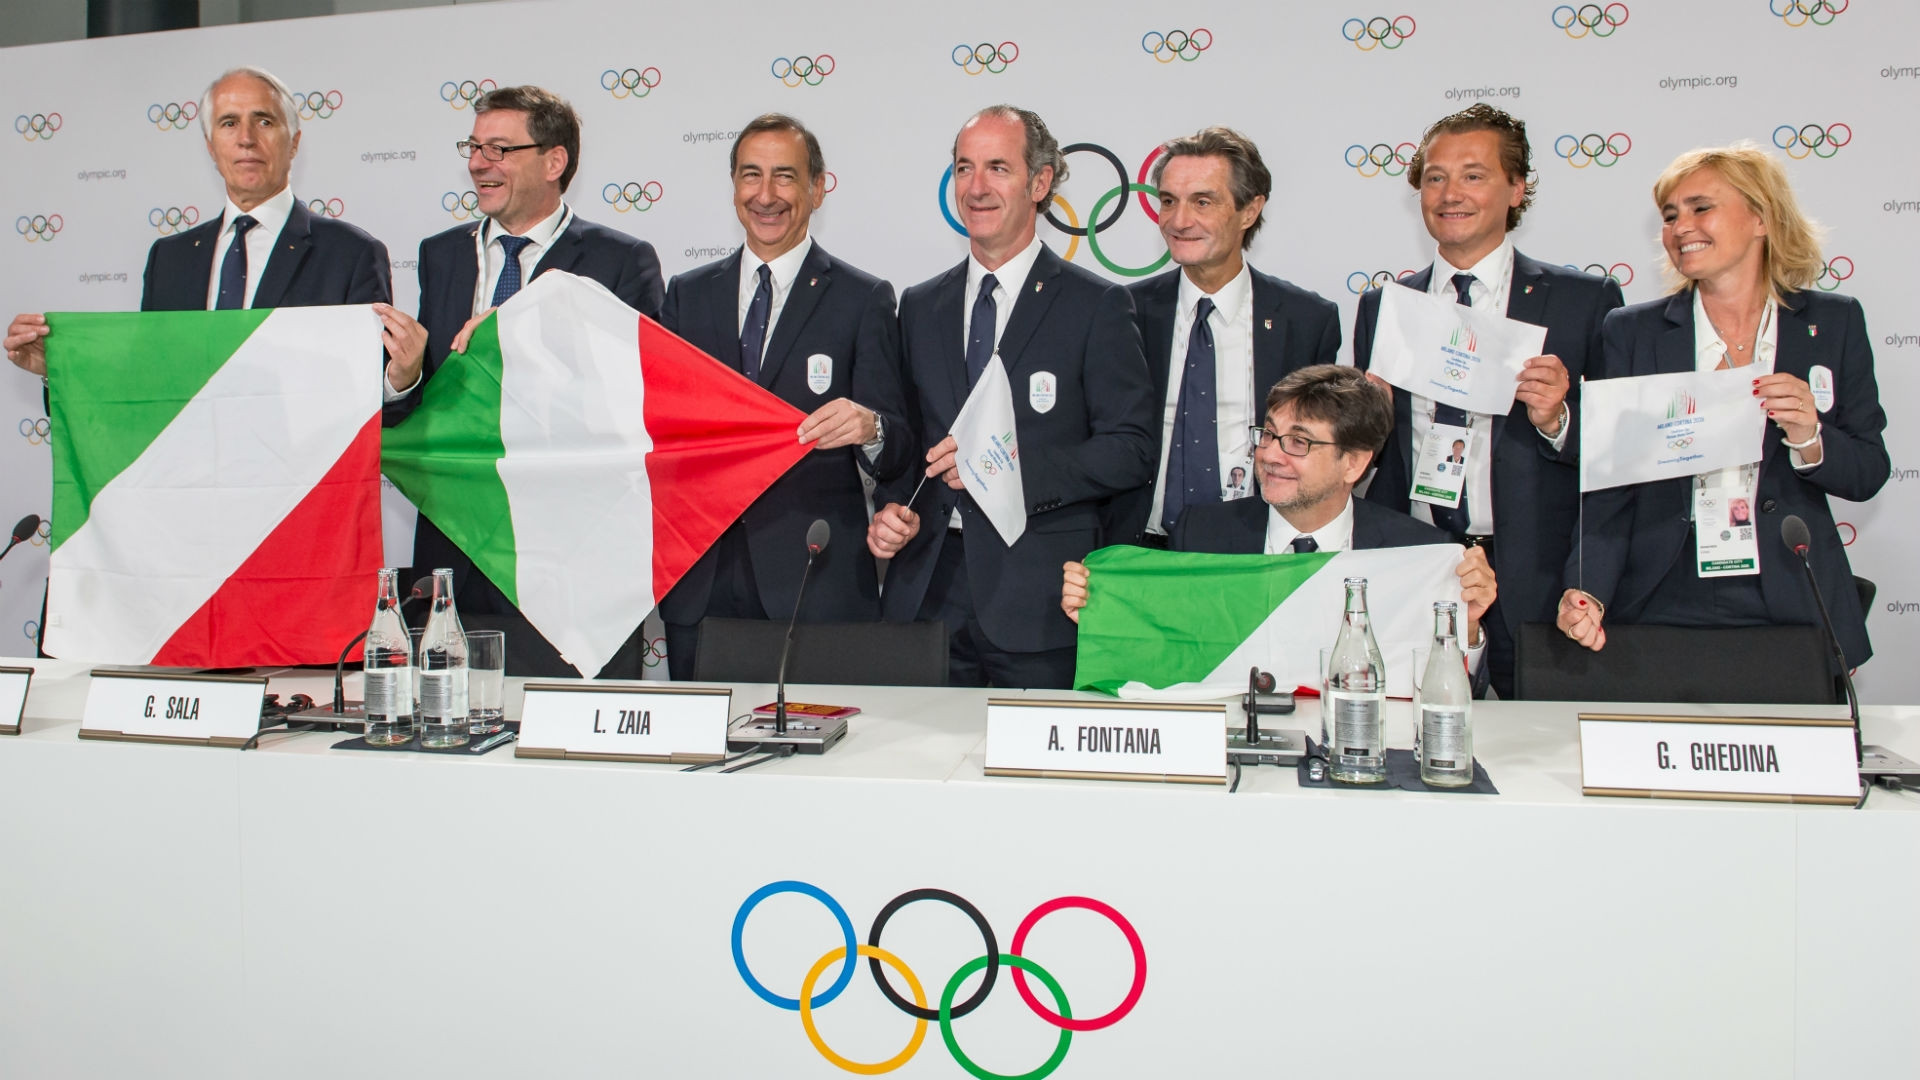 The Milan Cortina bid was awarded the 2026 Winter Olympics in 2019 ©Getty Images